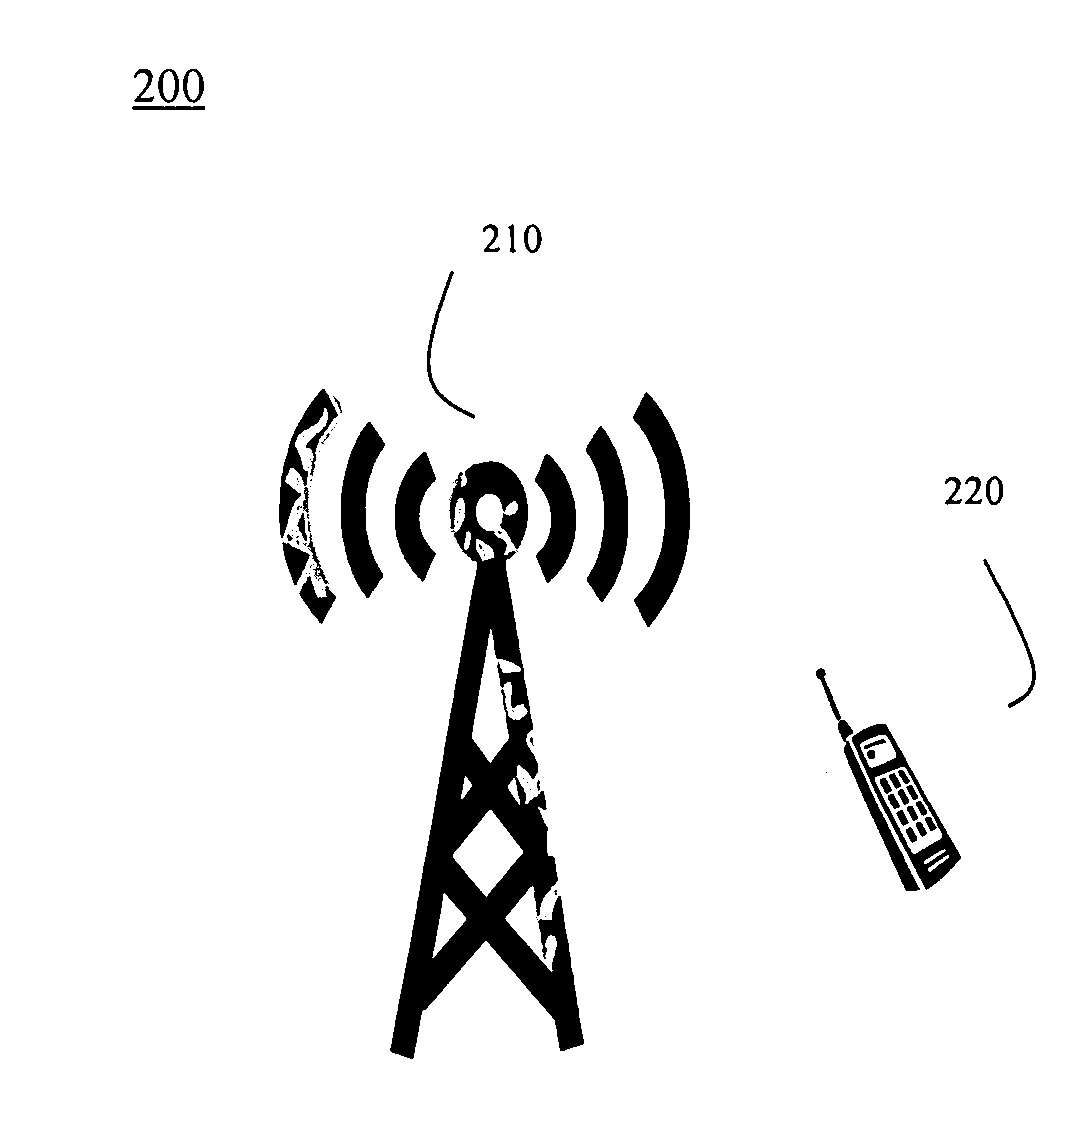 Method for transmitting fast scheduling request messages in scheduled packet data systems